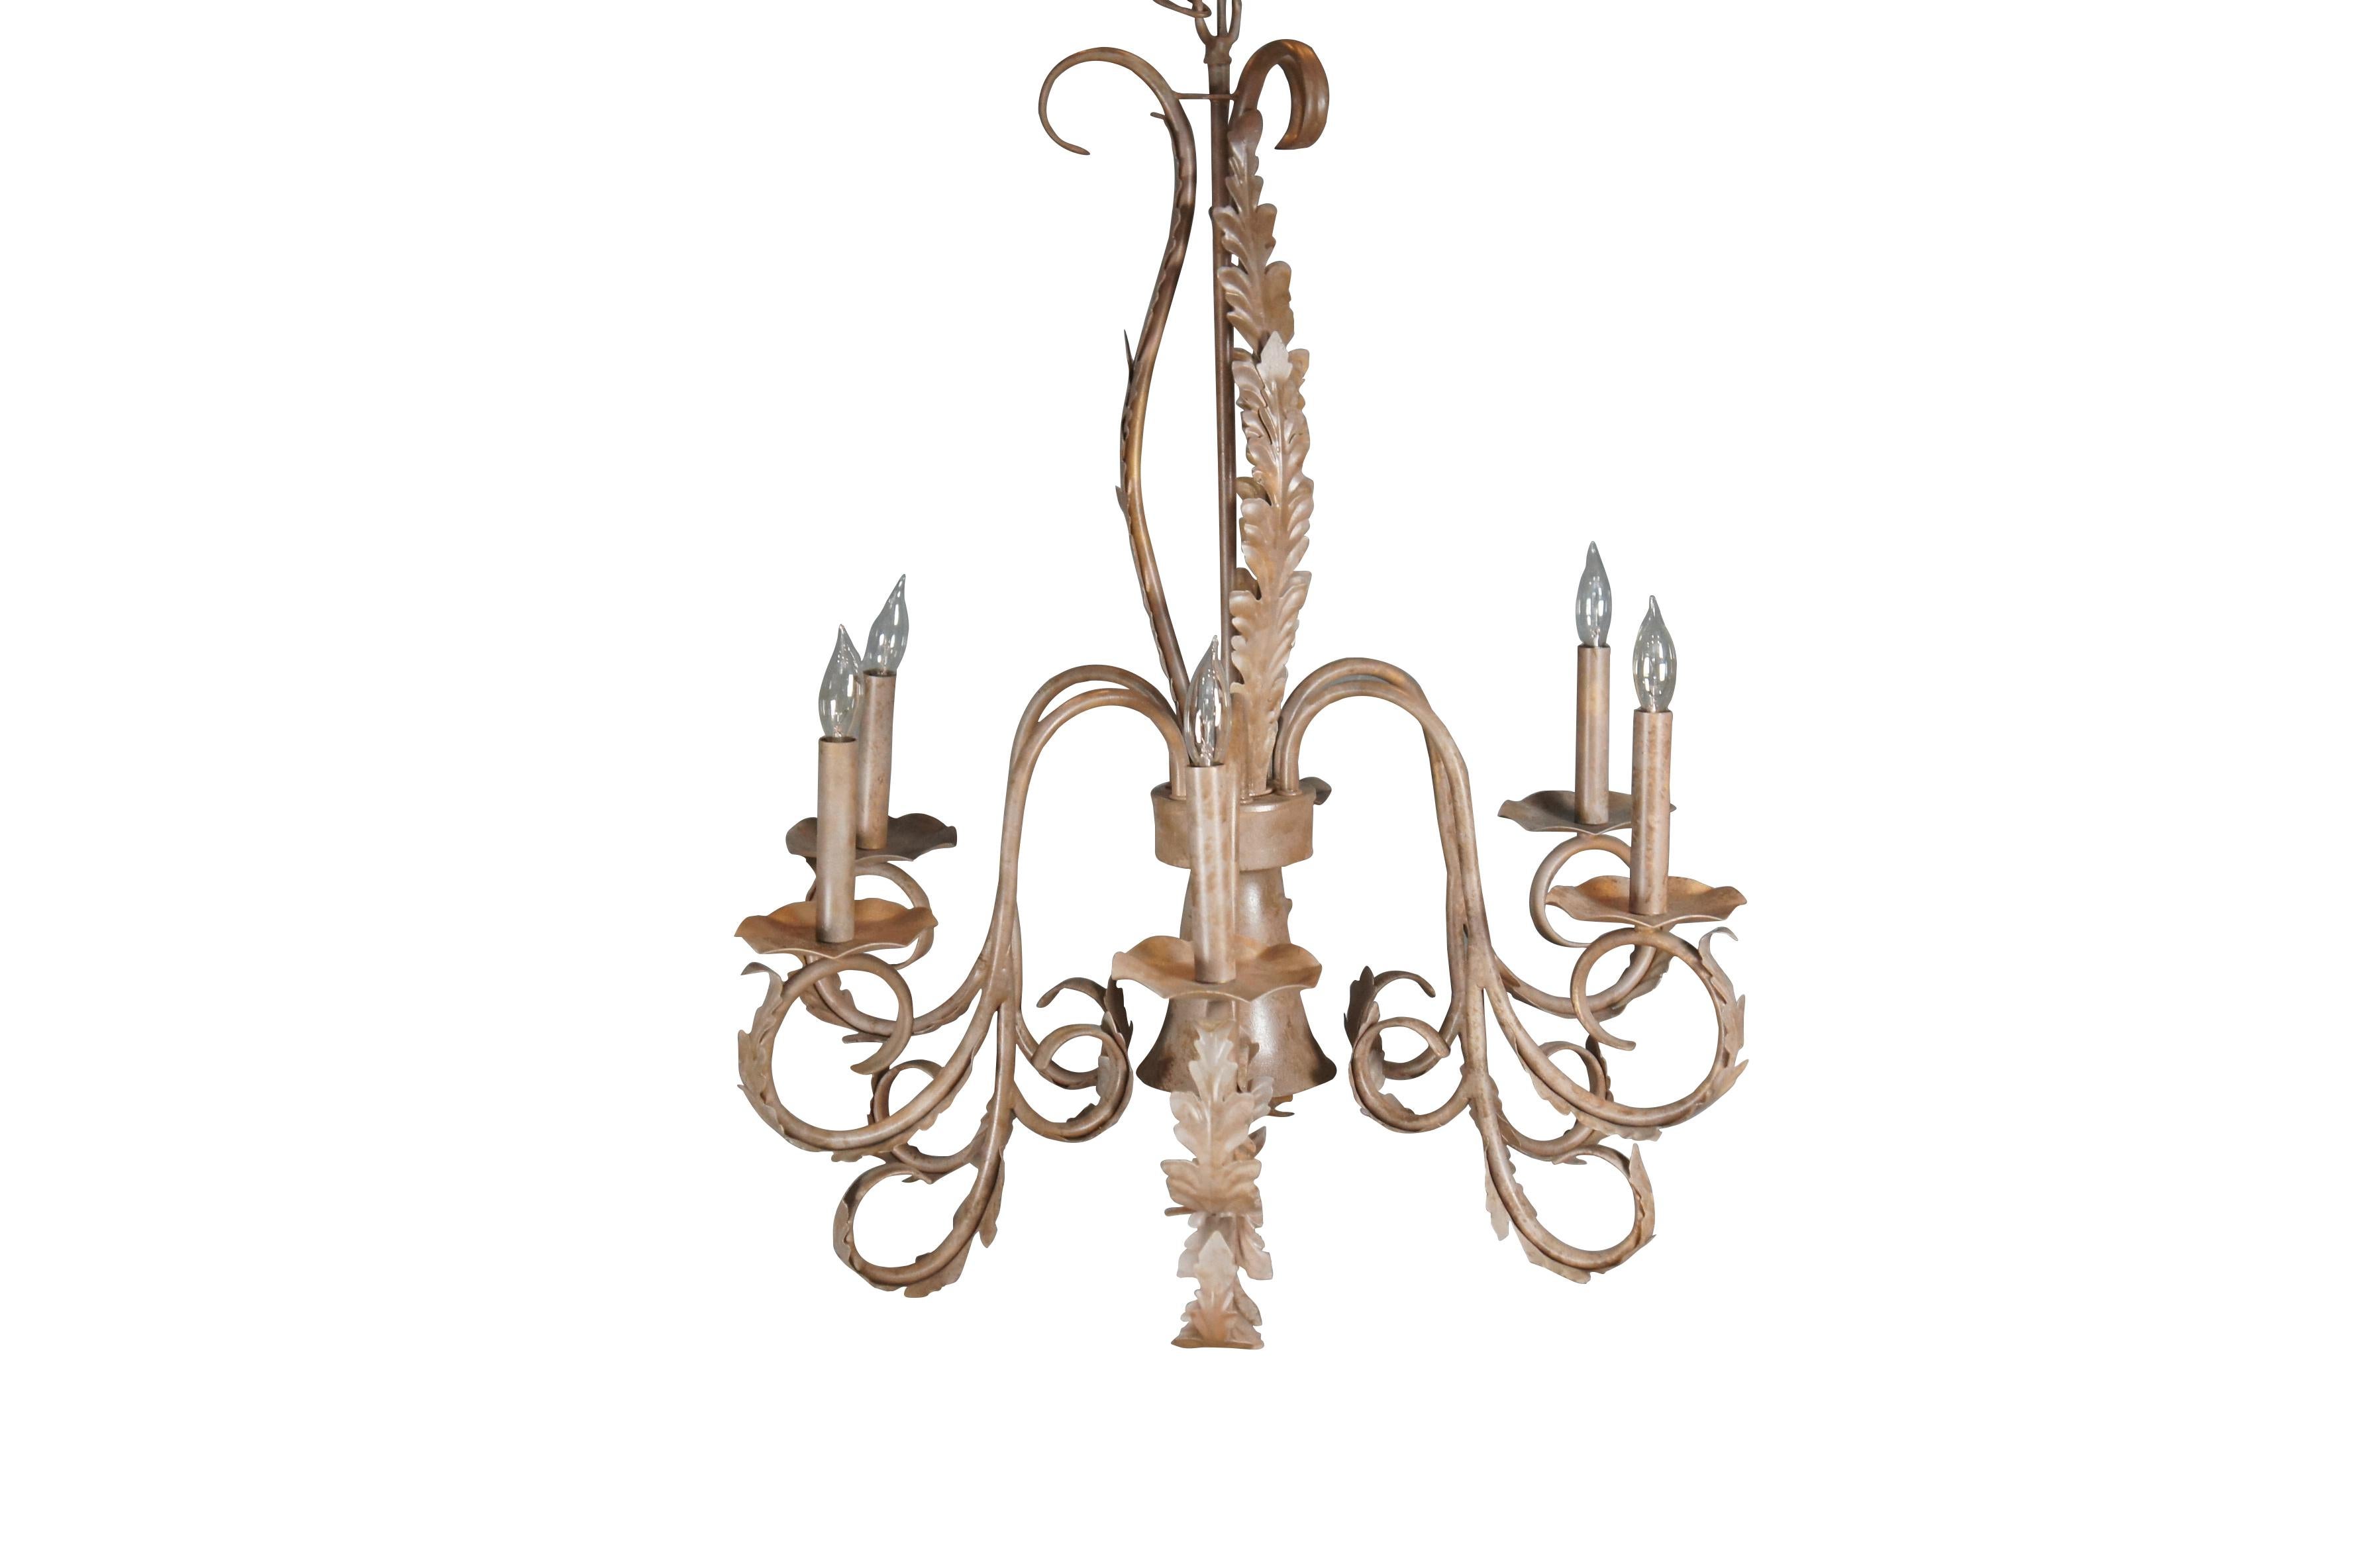 Vintage French Acanthus scrolled iron chandelier featuring 6 arm design with down light.  The down light can be operated in conjunction with the other lights or by itself.

Dimensions:
27